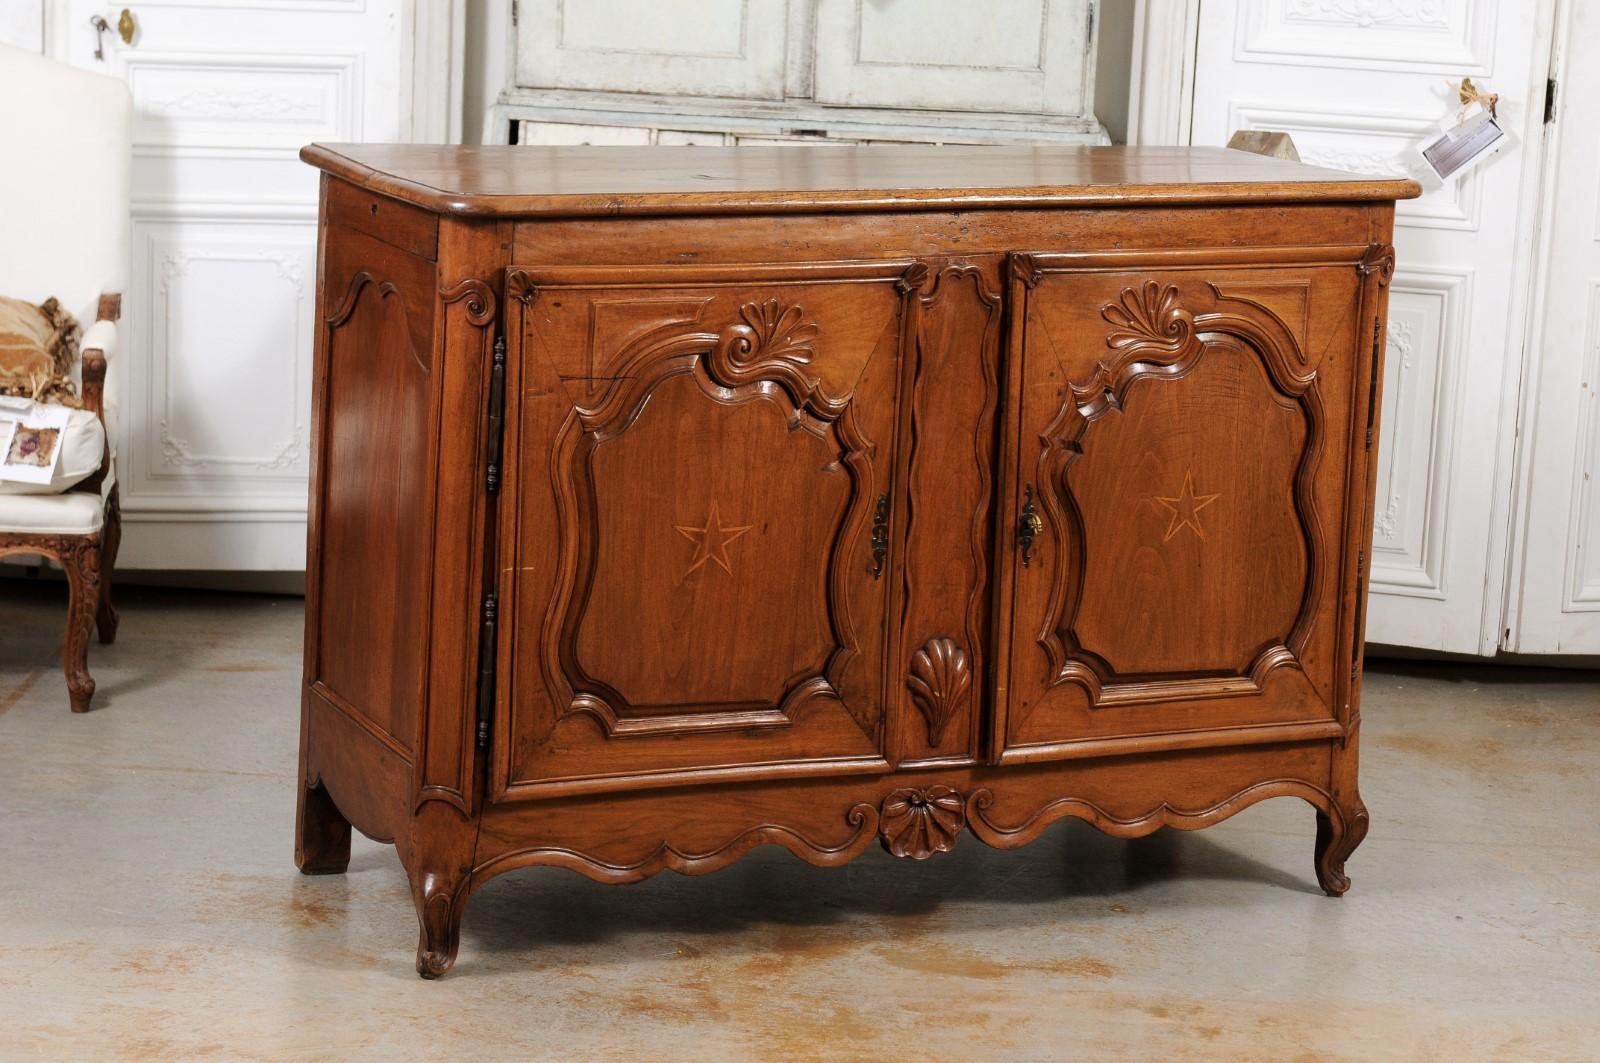 A French Louis XV period walnut buffet from the mid-18th century, with star inlay and carved shells. Created in France during the reign of King Louis XV nicknamed Le Bien-Aimé (the Beloved), this walnut buffet features a rectangular planked top with